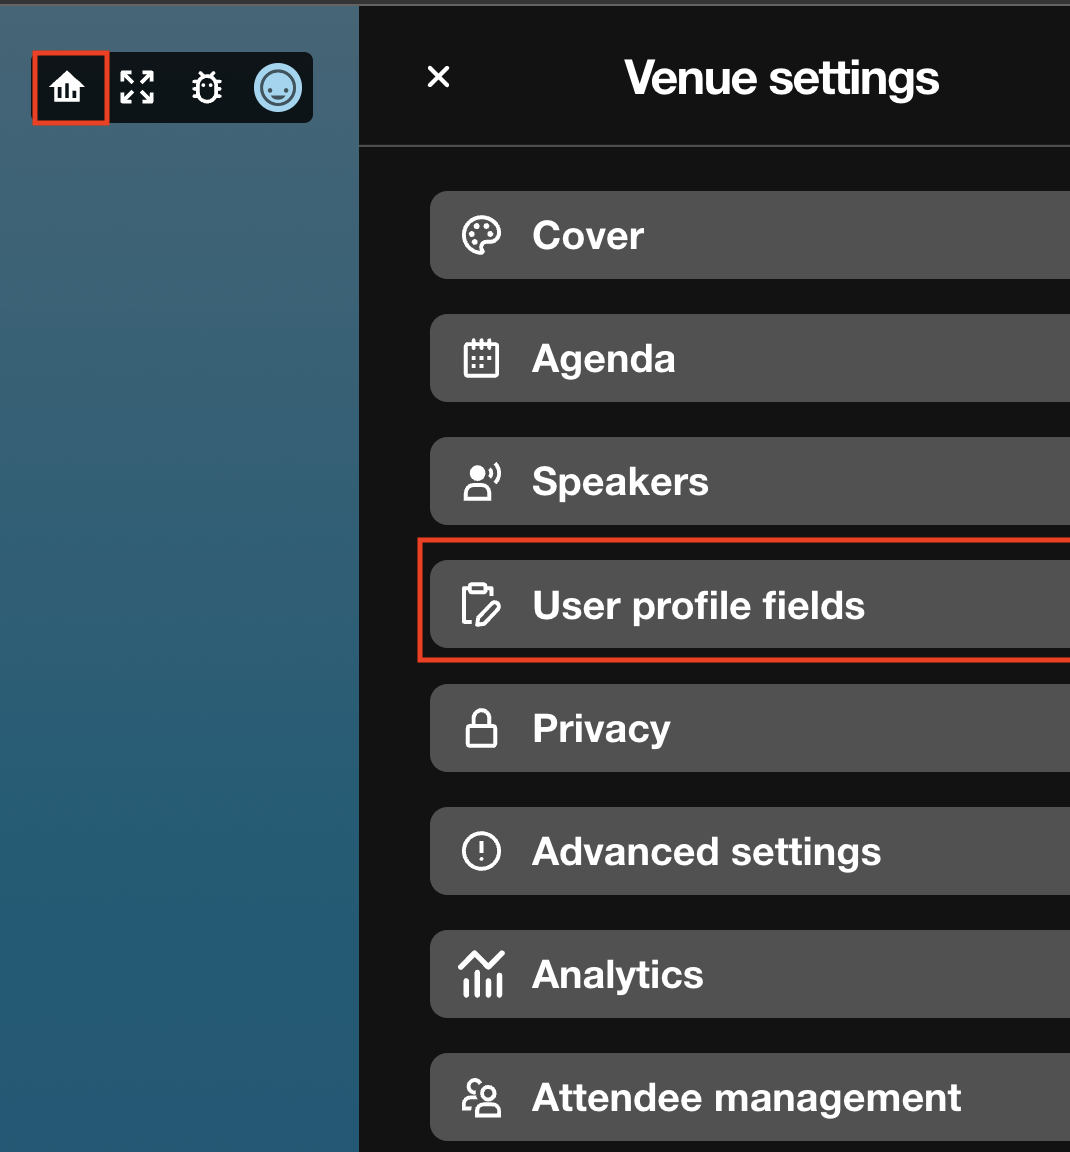 venues_settings_panel_highlighting_the_user_profile_fields_option.png